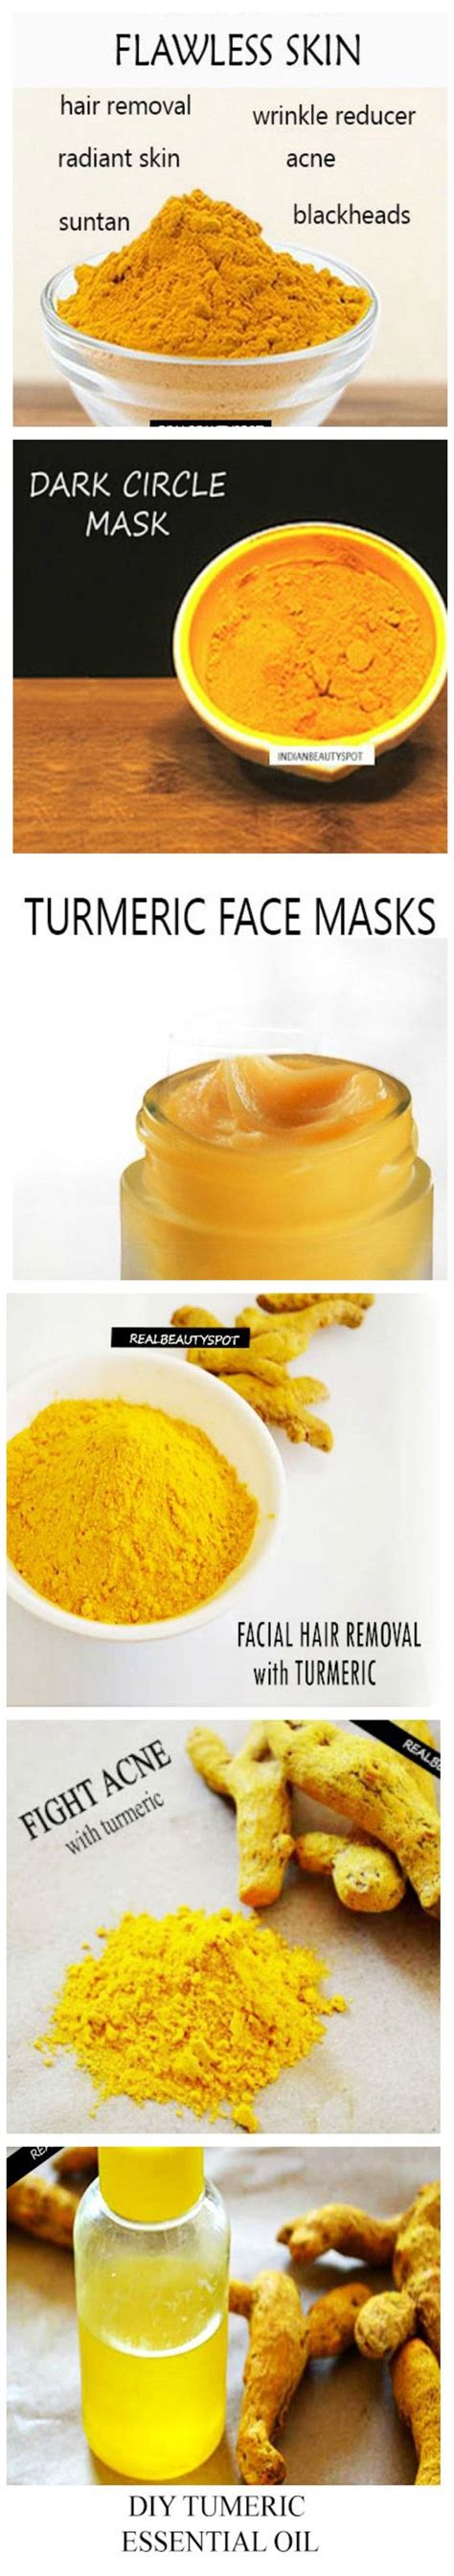 10 Best Turmeric Home Remedies For Beauty Beauty And Fitness With Marry